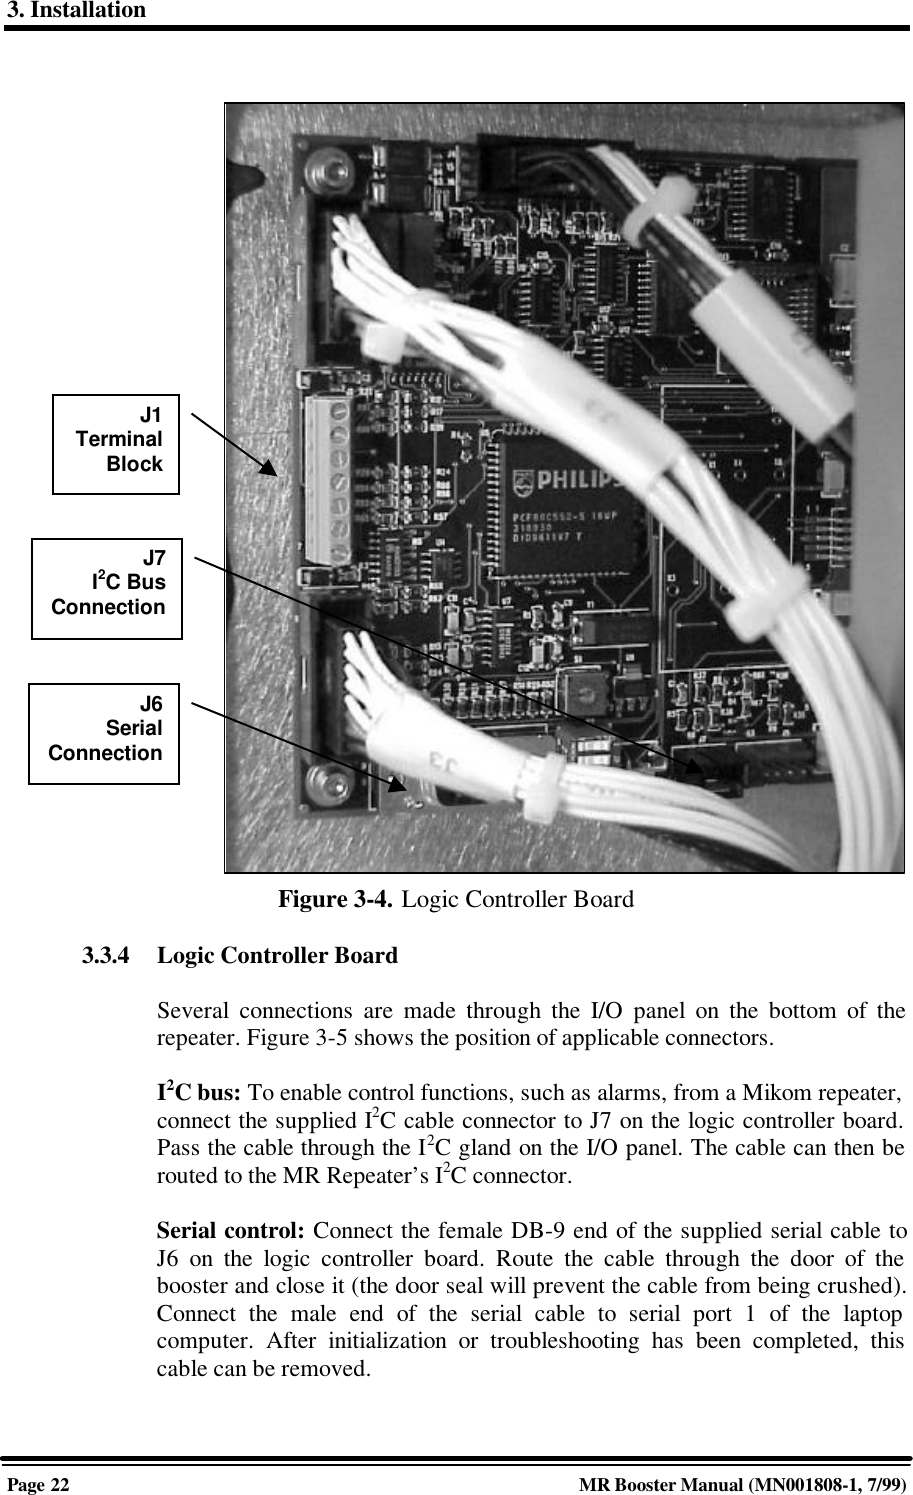 3. InstallationPage 22 MR Booster Manual (MN001808-1, 7/99)Figure 3-4. Logic Controller Board3.3.4 Logic Controller BoardSeveral connections are made through the I/O panel on the bottom of therepeater. Figure 3-5 shows the position of applicable connectors.I2C bus: To enable control functions, such as alarms, from a Mikom repeater,connect the supplied I2C cable connector to J7 on the logic controller board.Pass the cable through the I2C gland on the I/O panel. The cable can then berouted to the MR Repeater’s I2C connector.Serial control: Connect the female DB-9 end of the supplied serial cable toJ6 on the logic controller board. Route the cable through the door of thebooster and close it (the door seal will prevent the cable from being crushed).Connect the male end of the serial cable to serial port 1 of the laptopcomputer. After initialization or troubleshooting has been completed, thiscable can be removed.J1TerminalBlockJ6SerialConnectionJ7I2C BusConnection